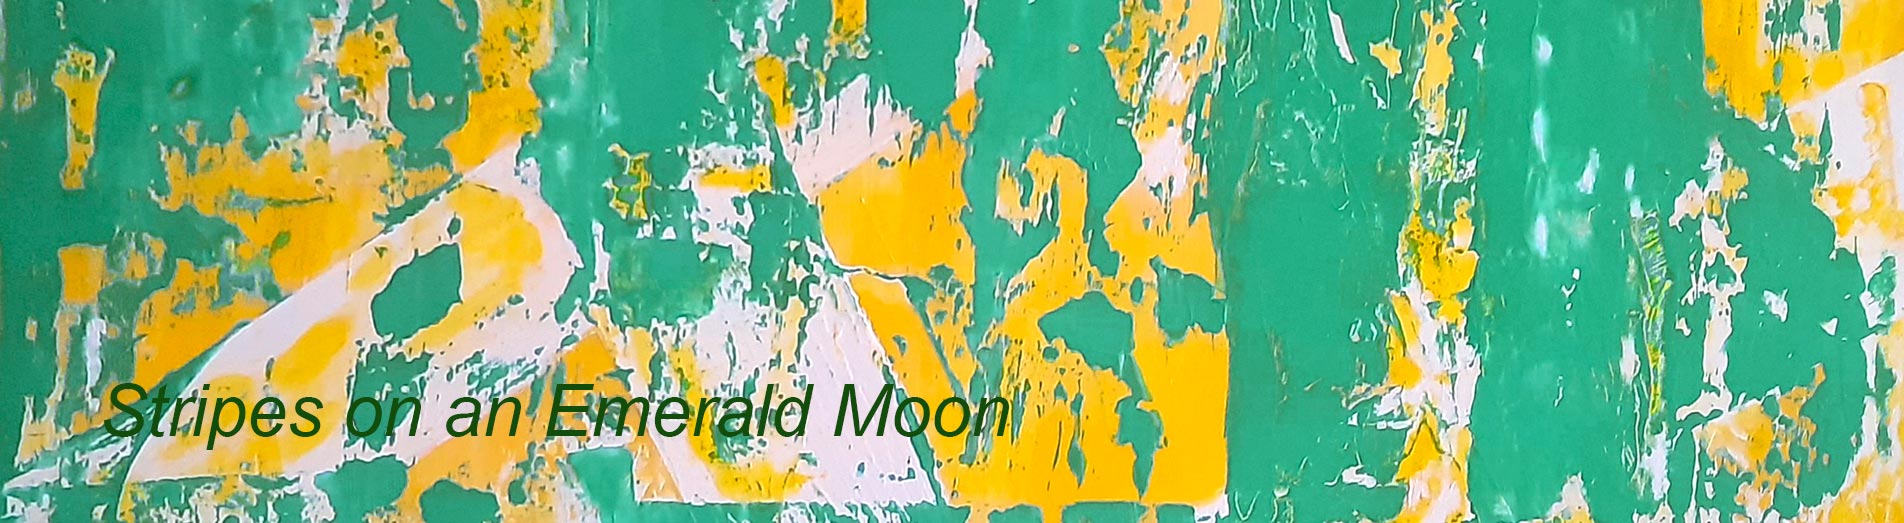 Stripes on an Emerald Moon painting by patrick joosten,